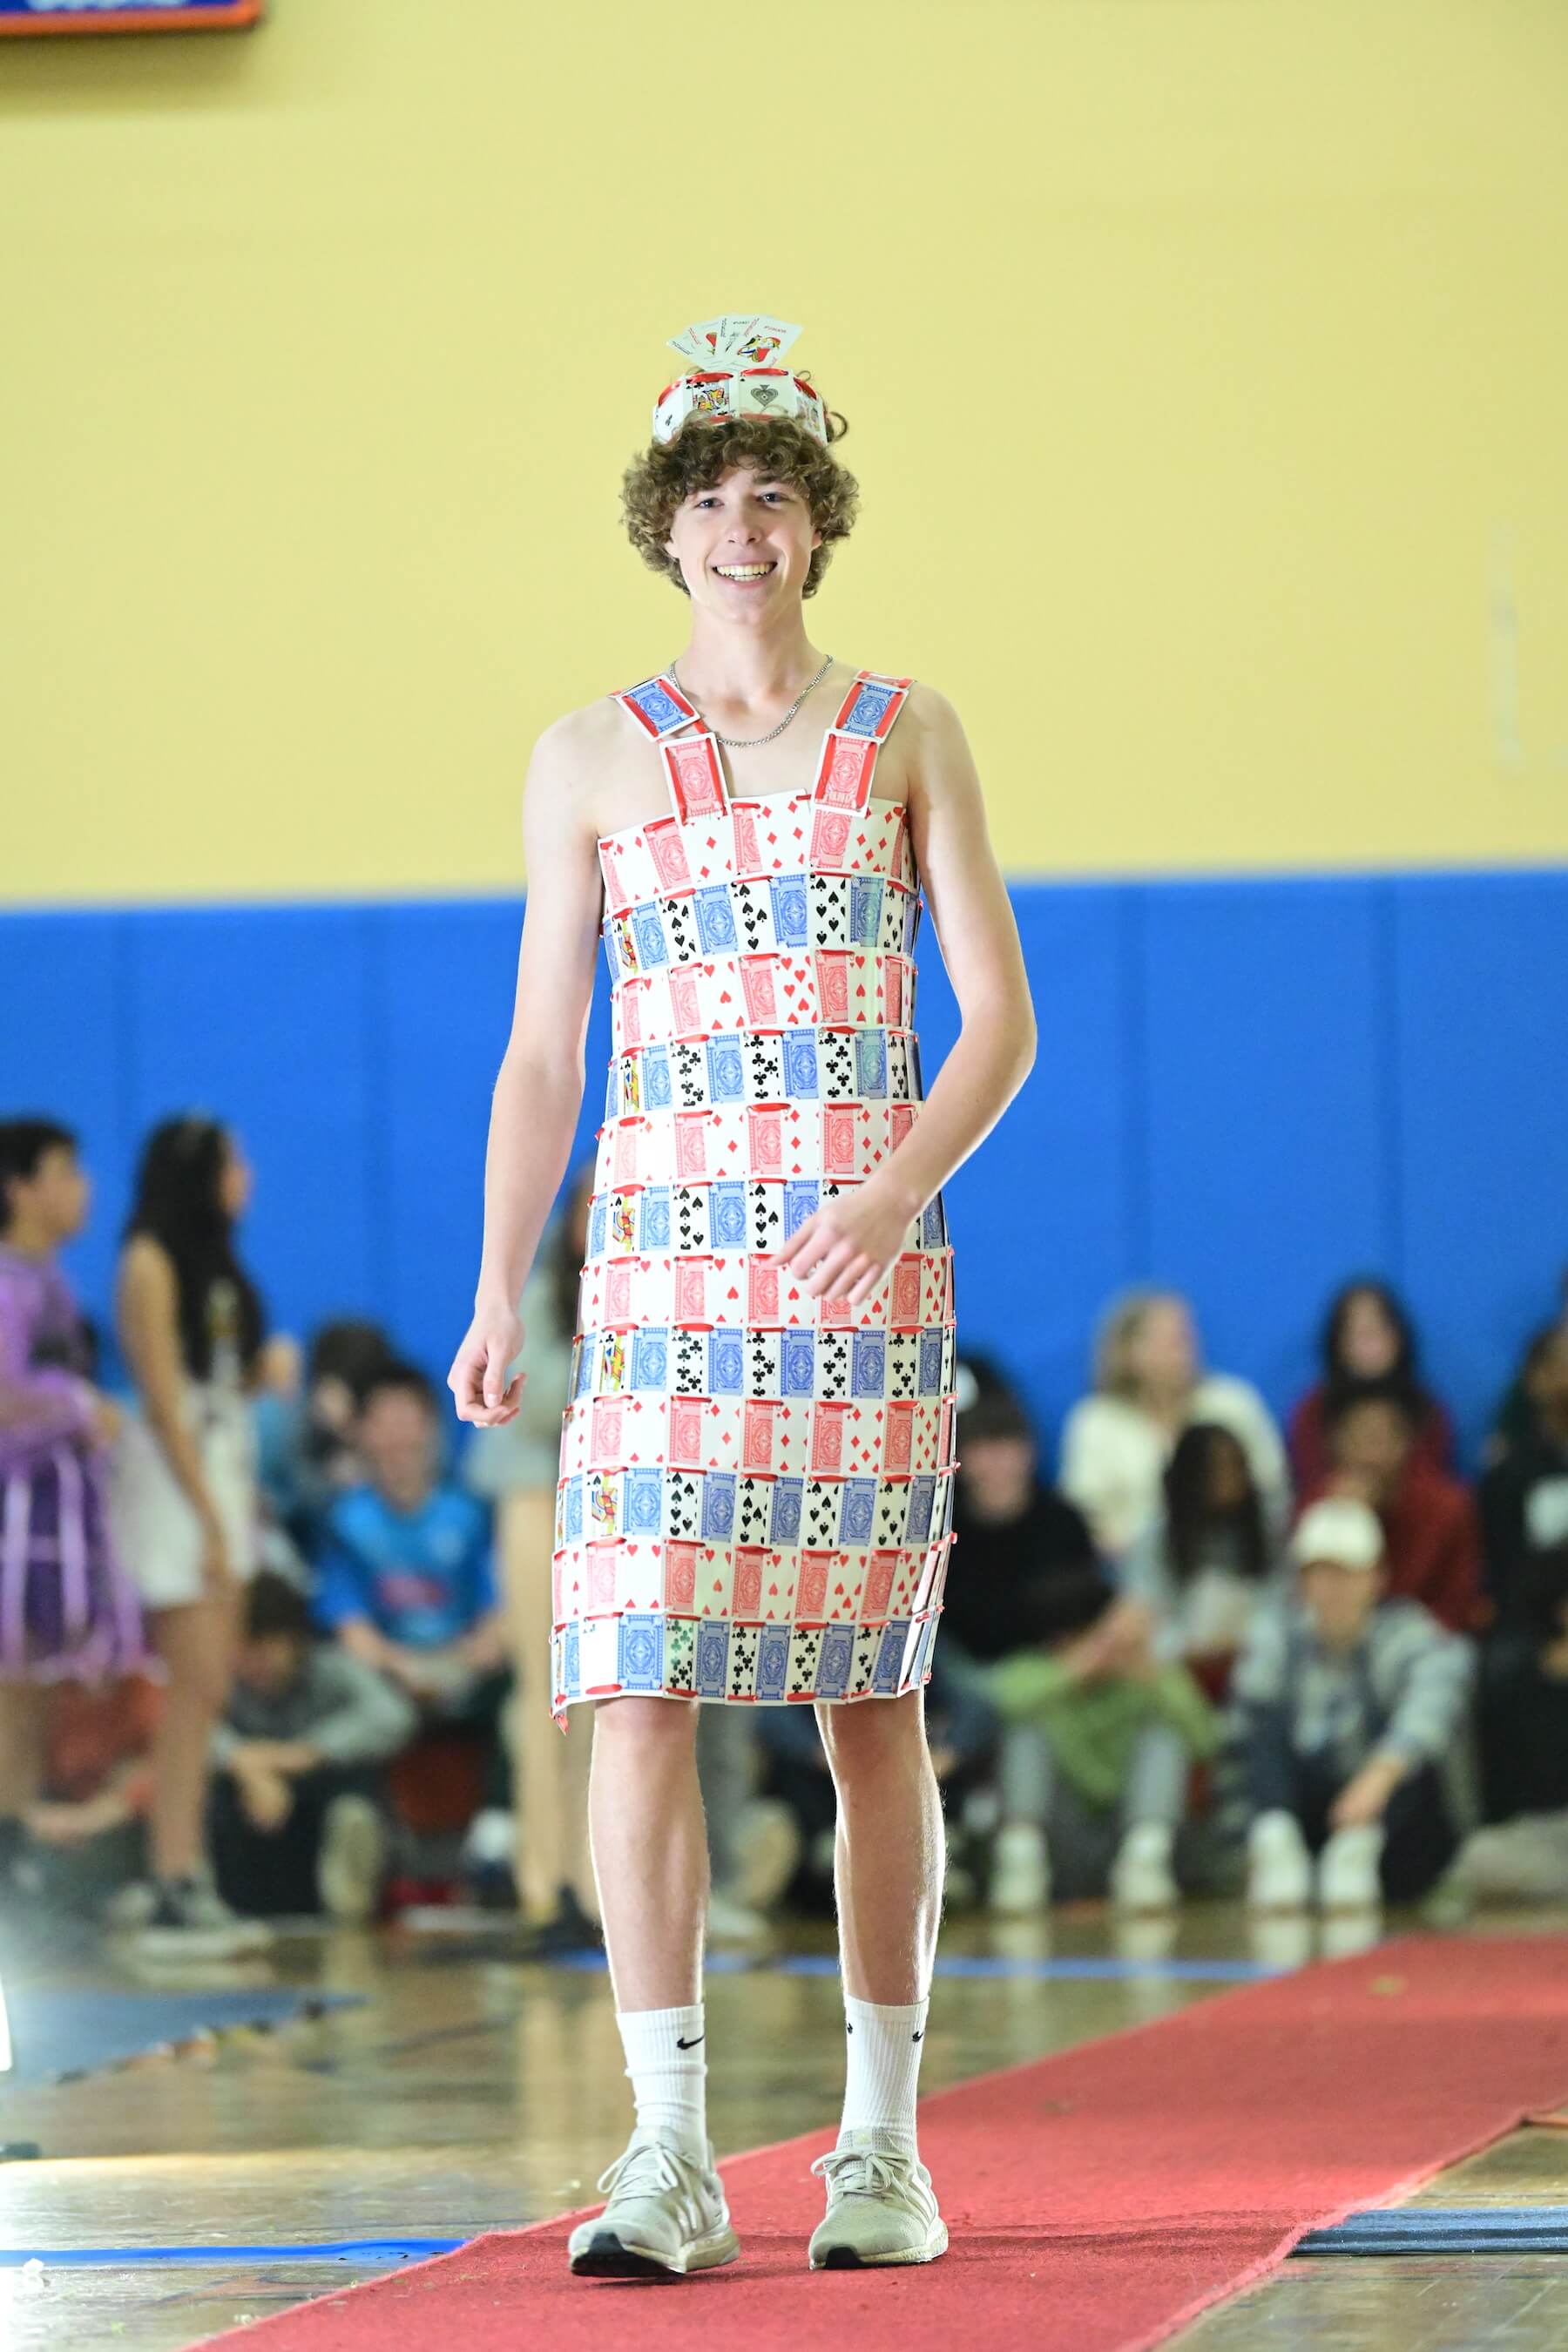 An Ethical Culture Fieldston Upper School student models at the Fashion Show.